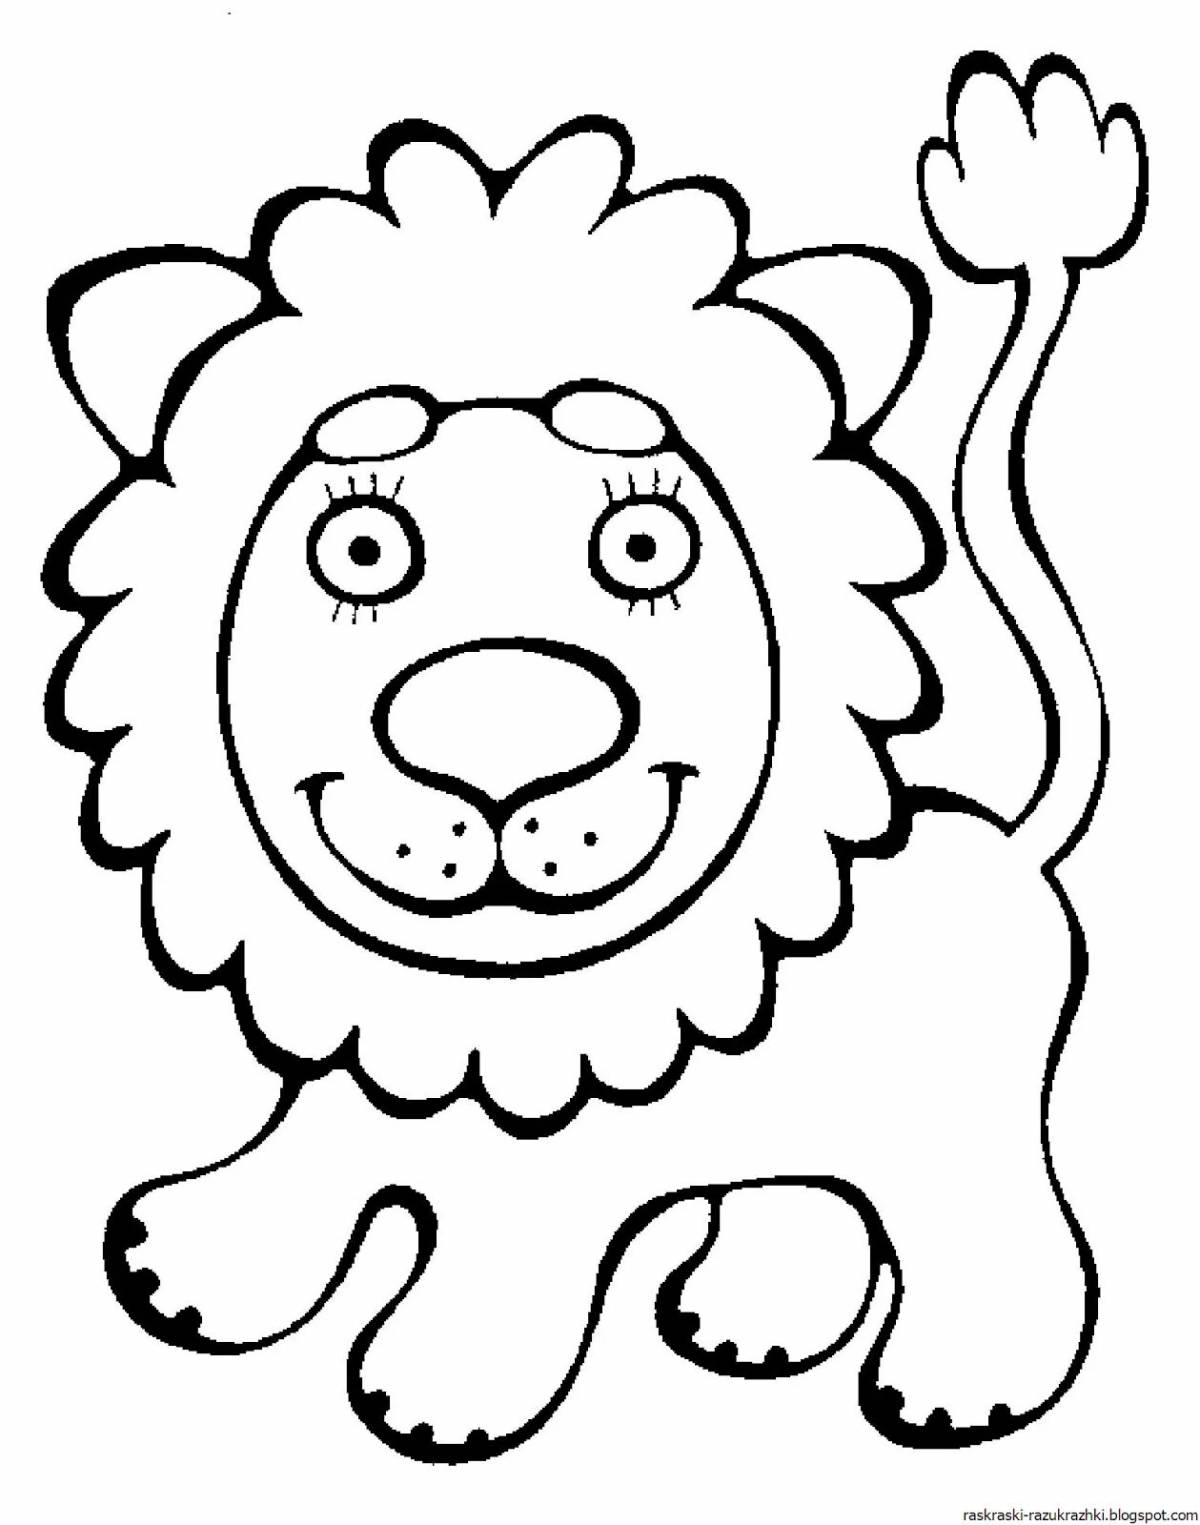 Outstanding lion cub coloring page for kids